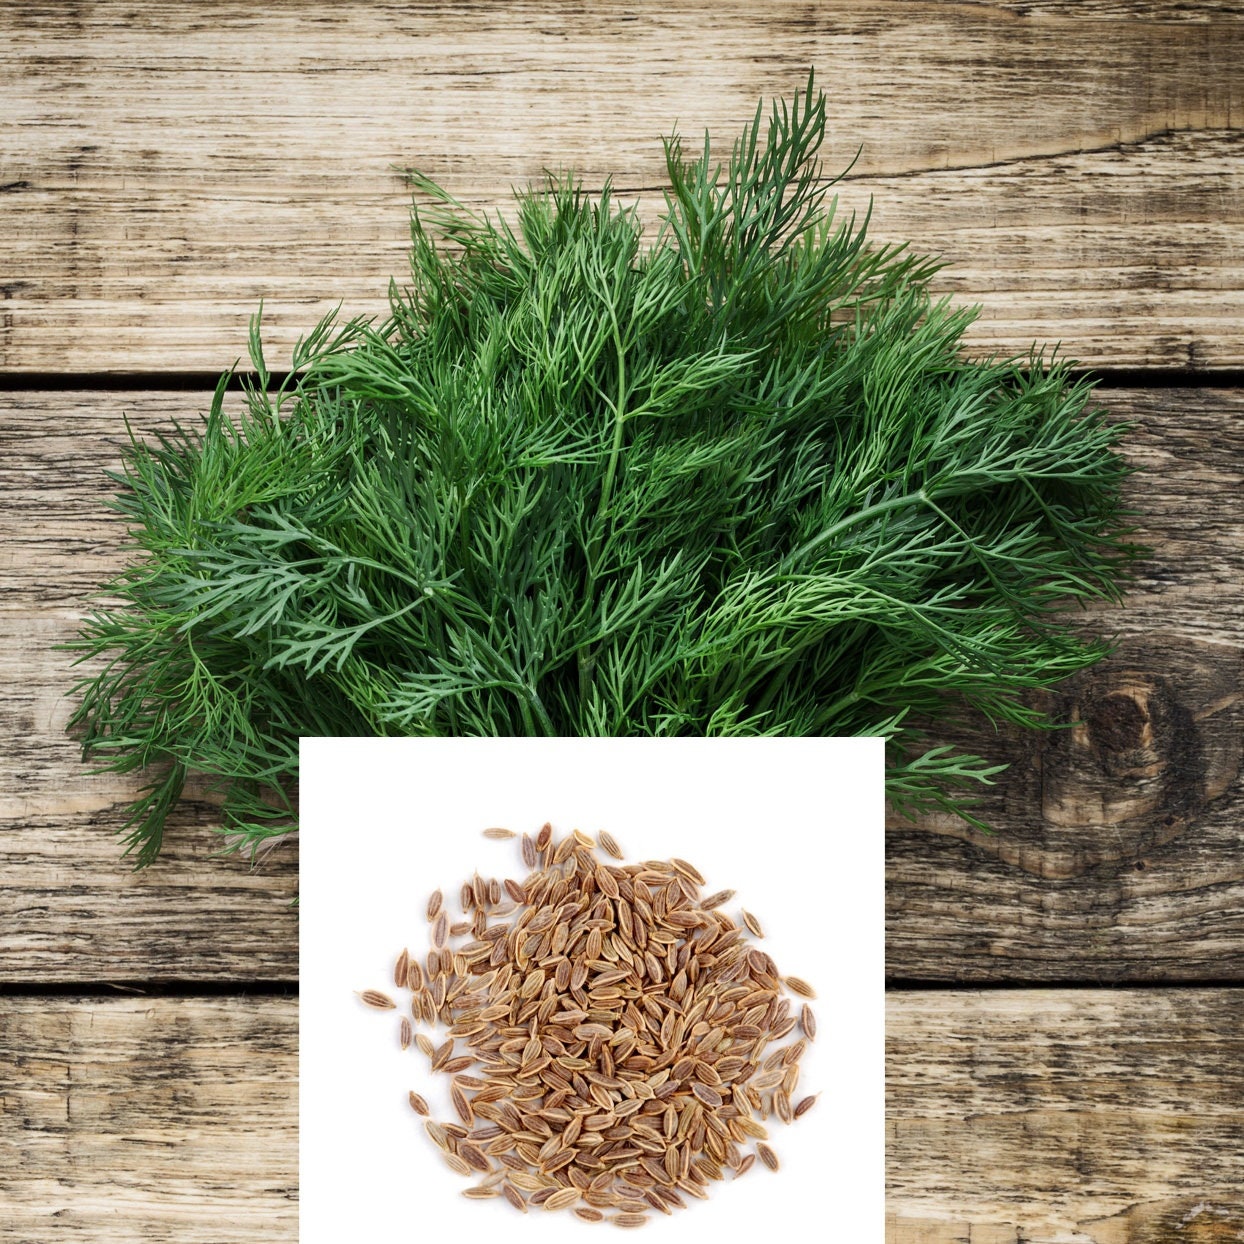 Instructions Inc DILL culinary Herb garden 300+ seeds NON GMO open polinated : 